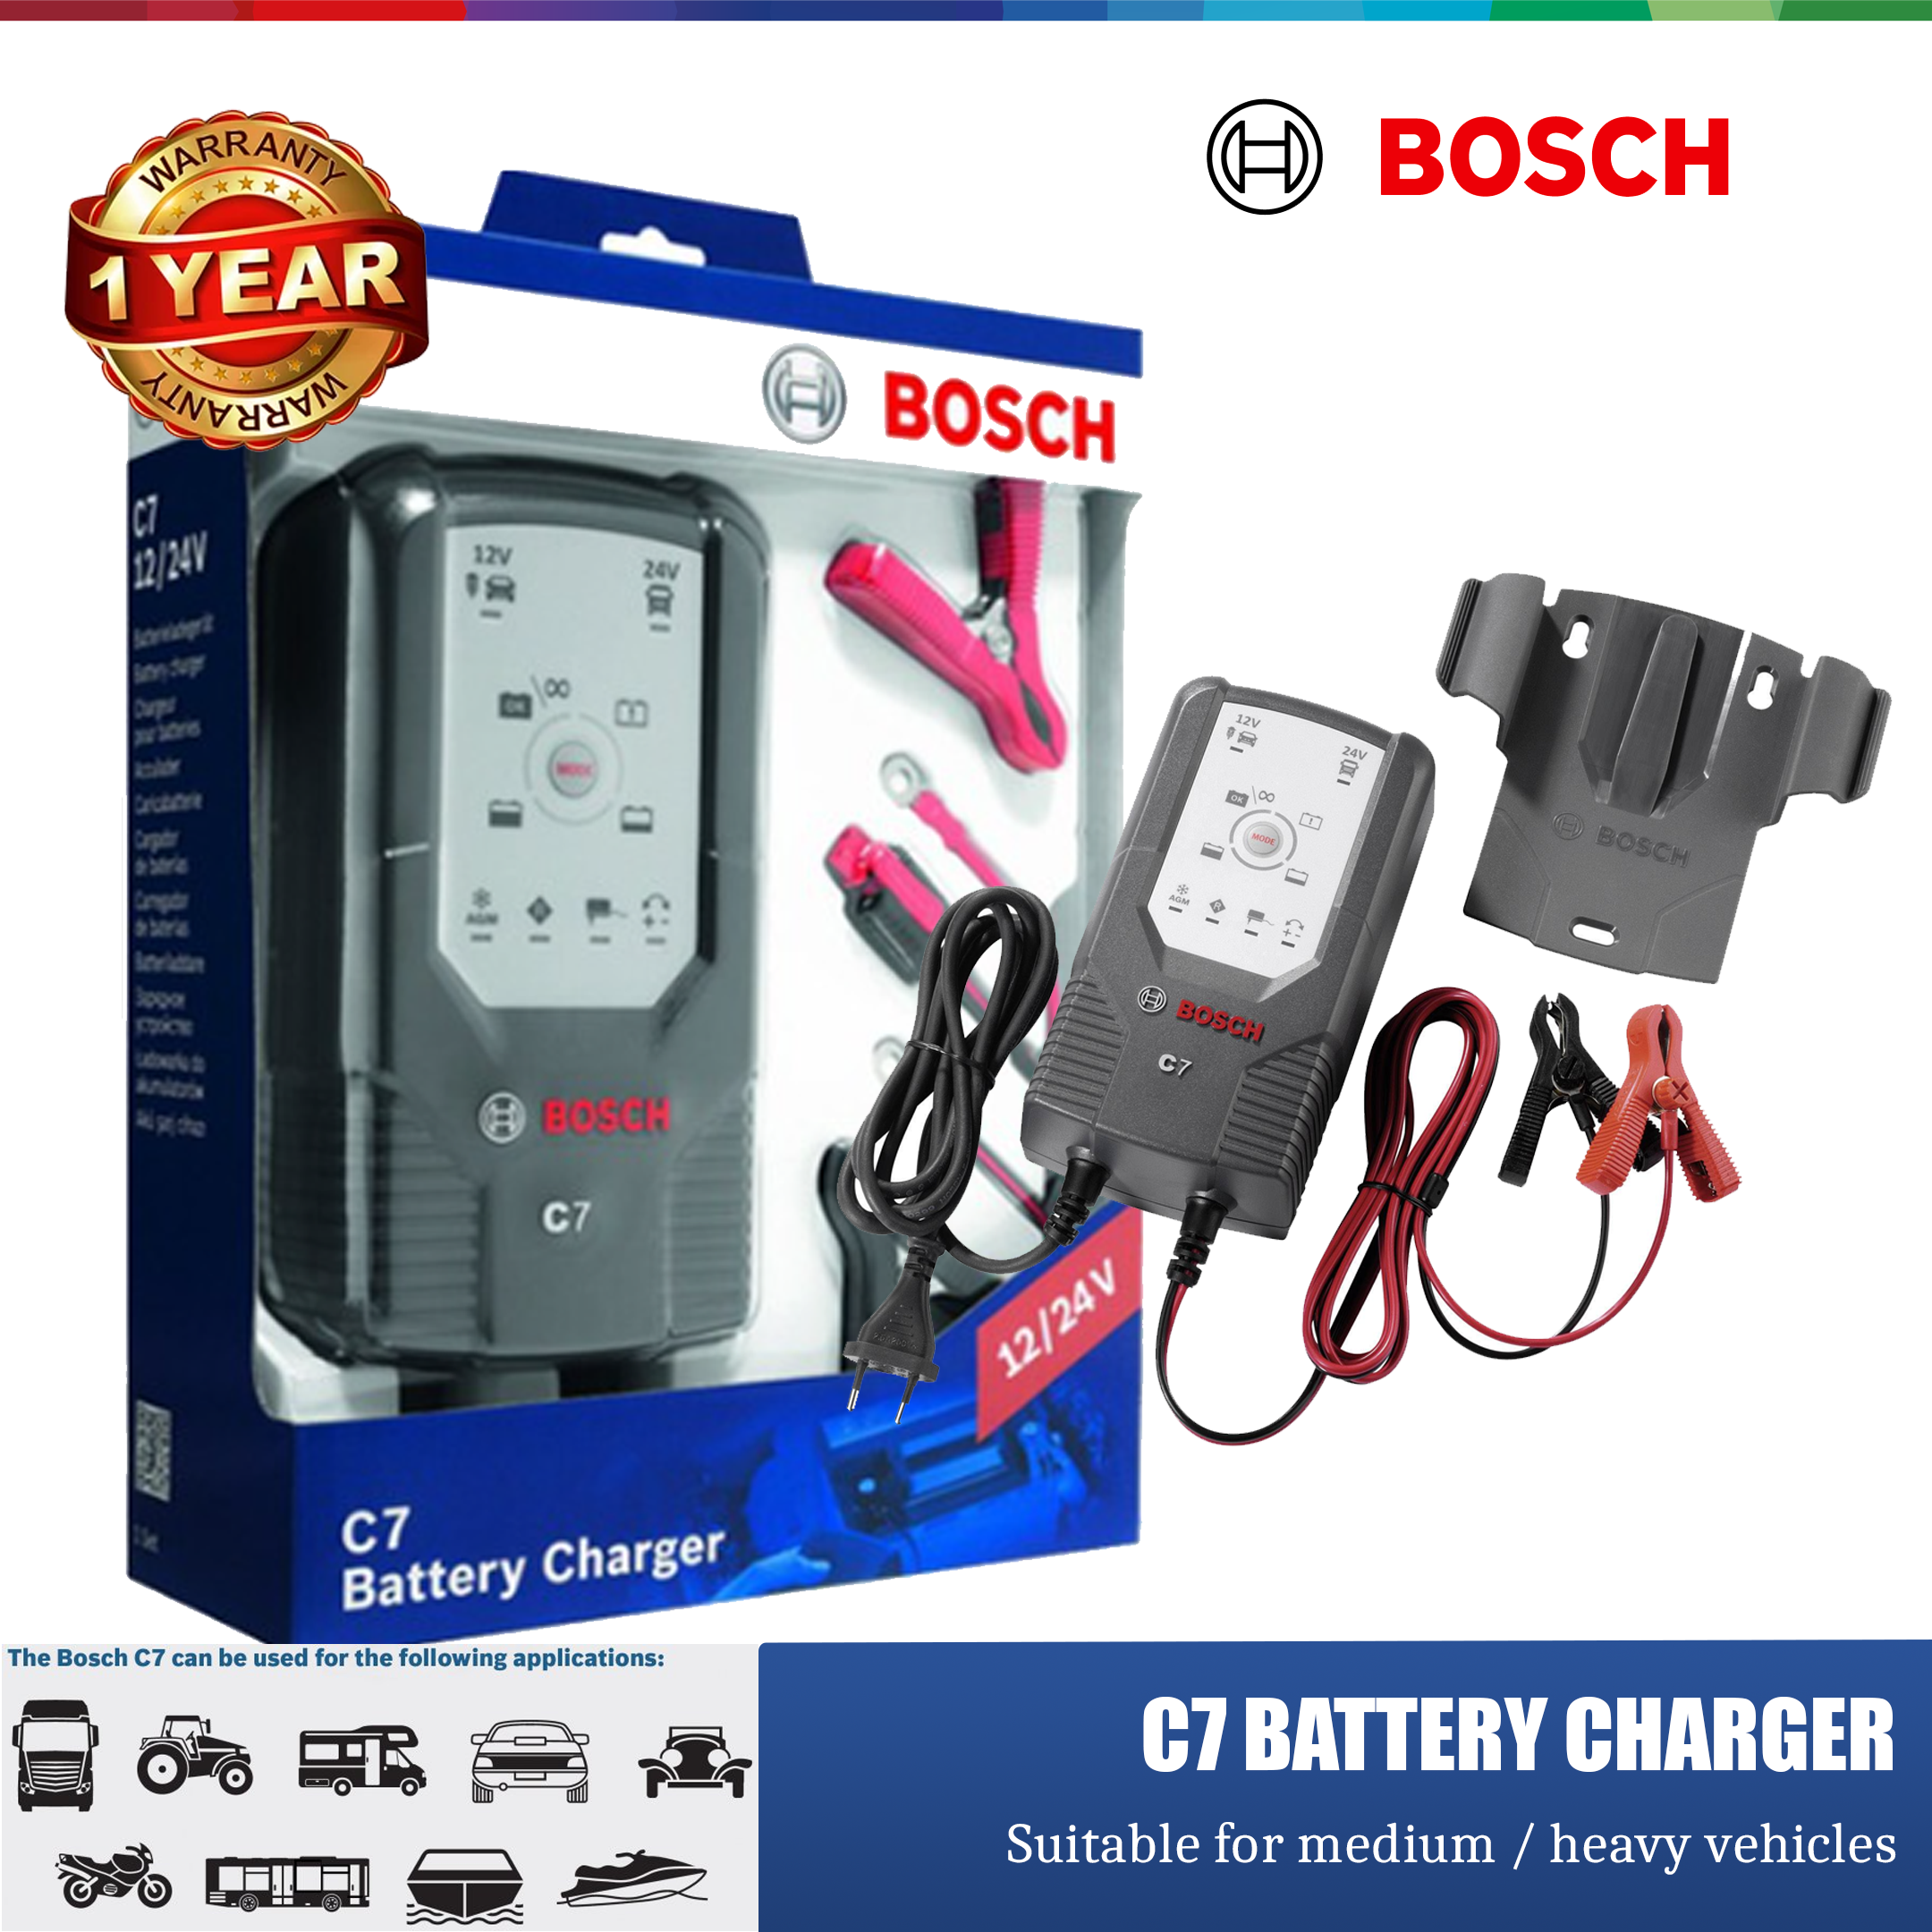 Bosch C7 - How to use 